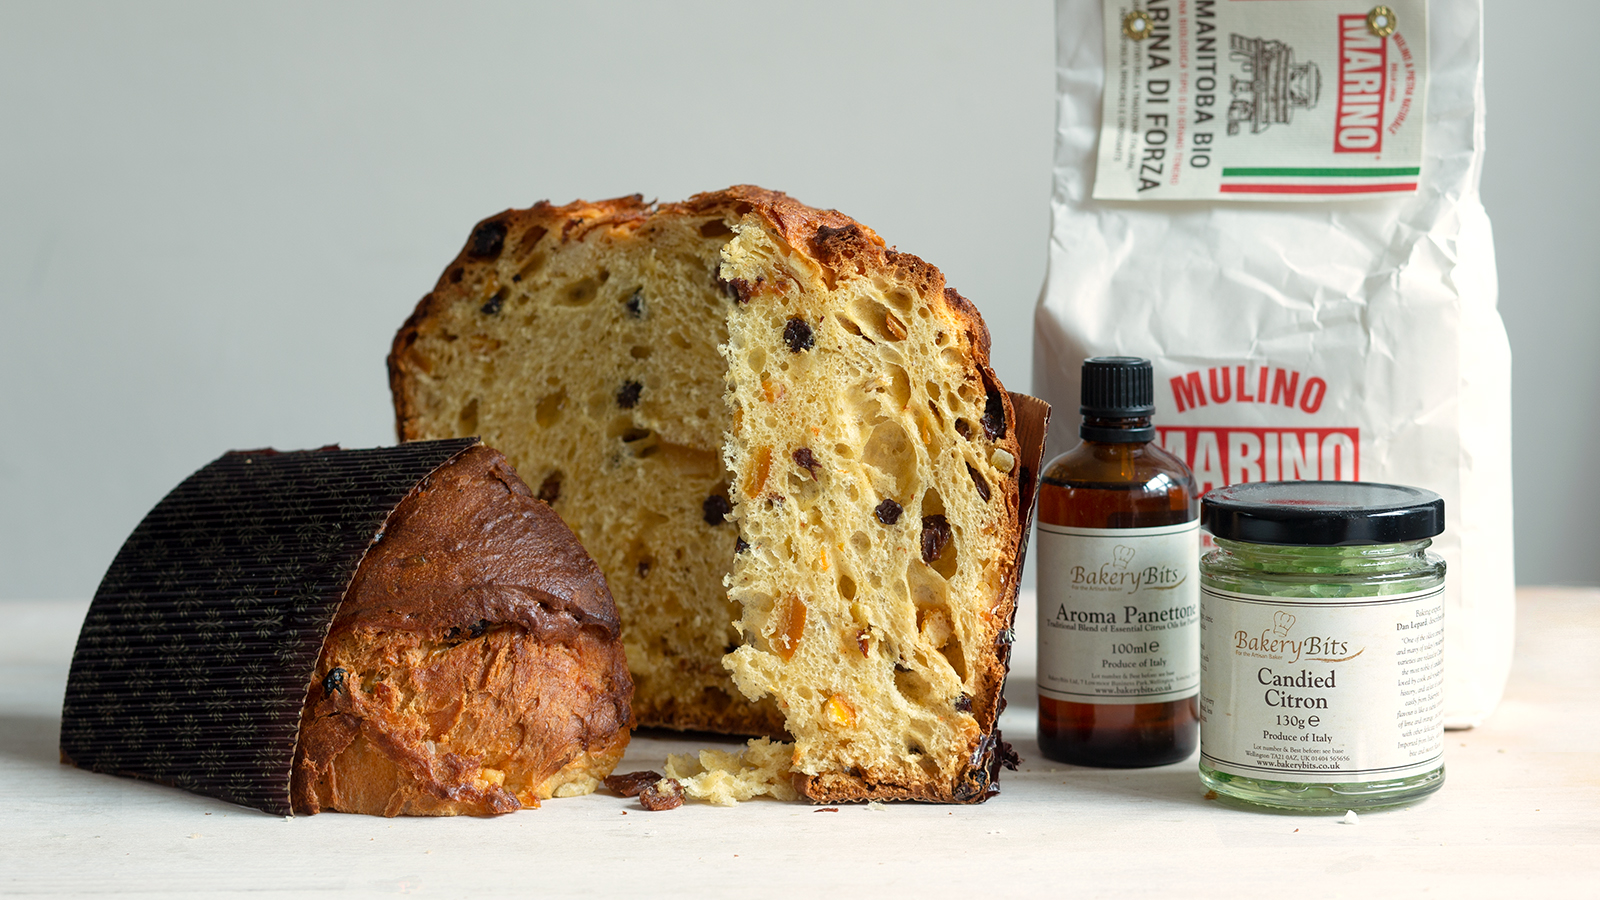 Traditional Panettone, made with commercial yeast